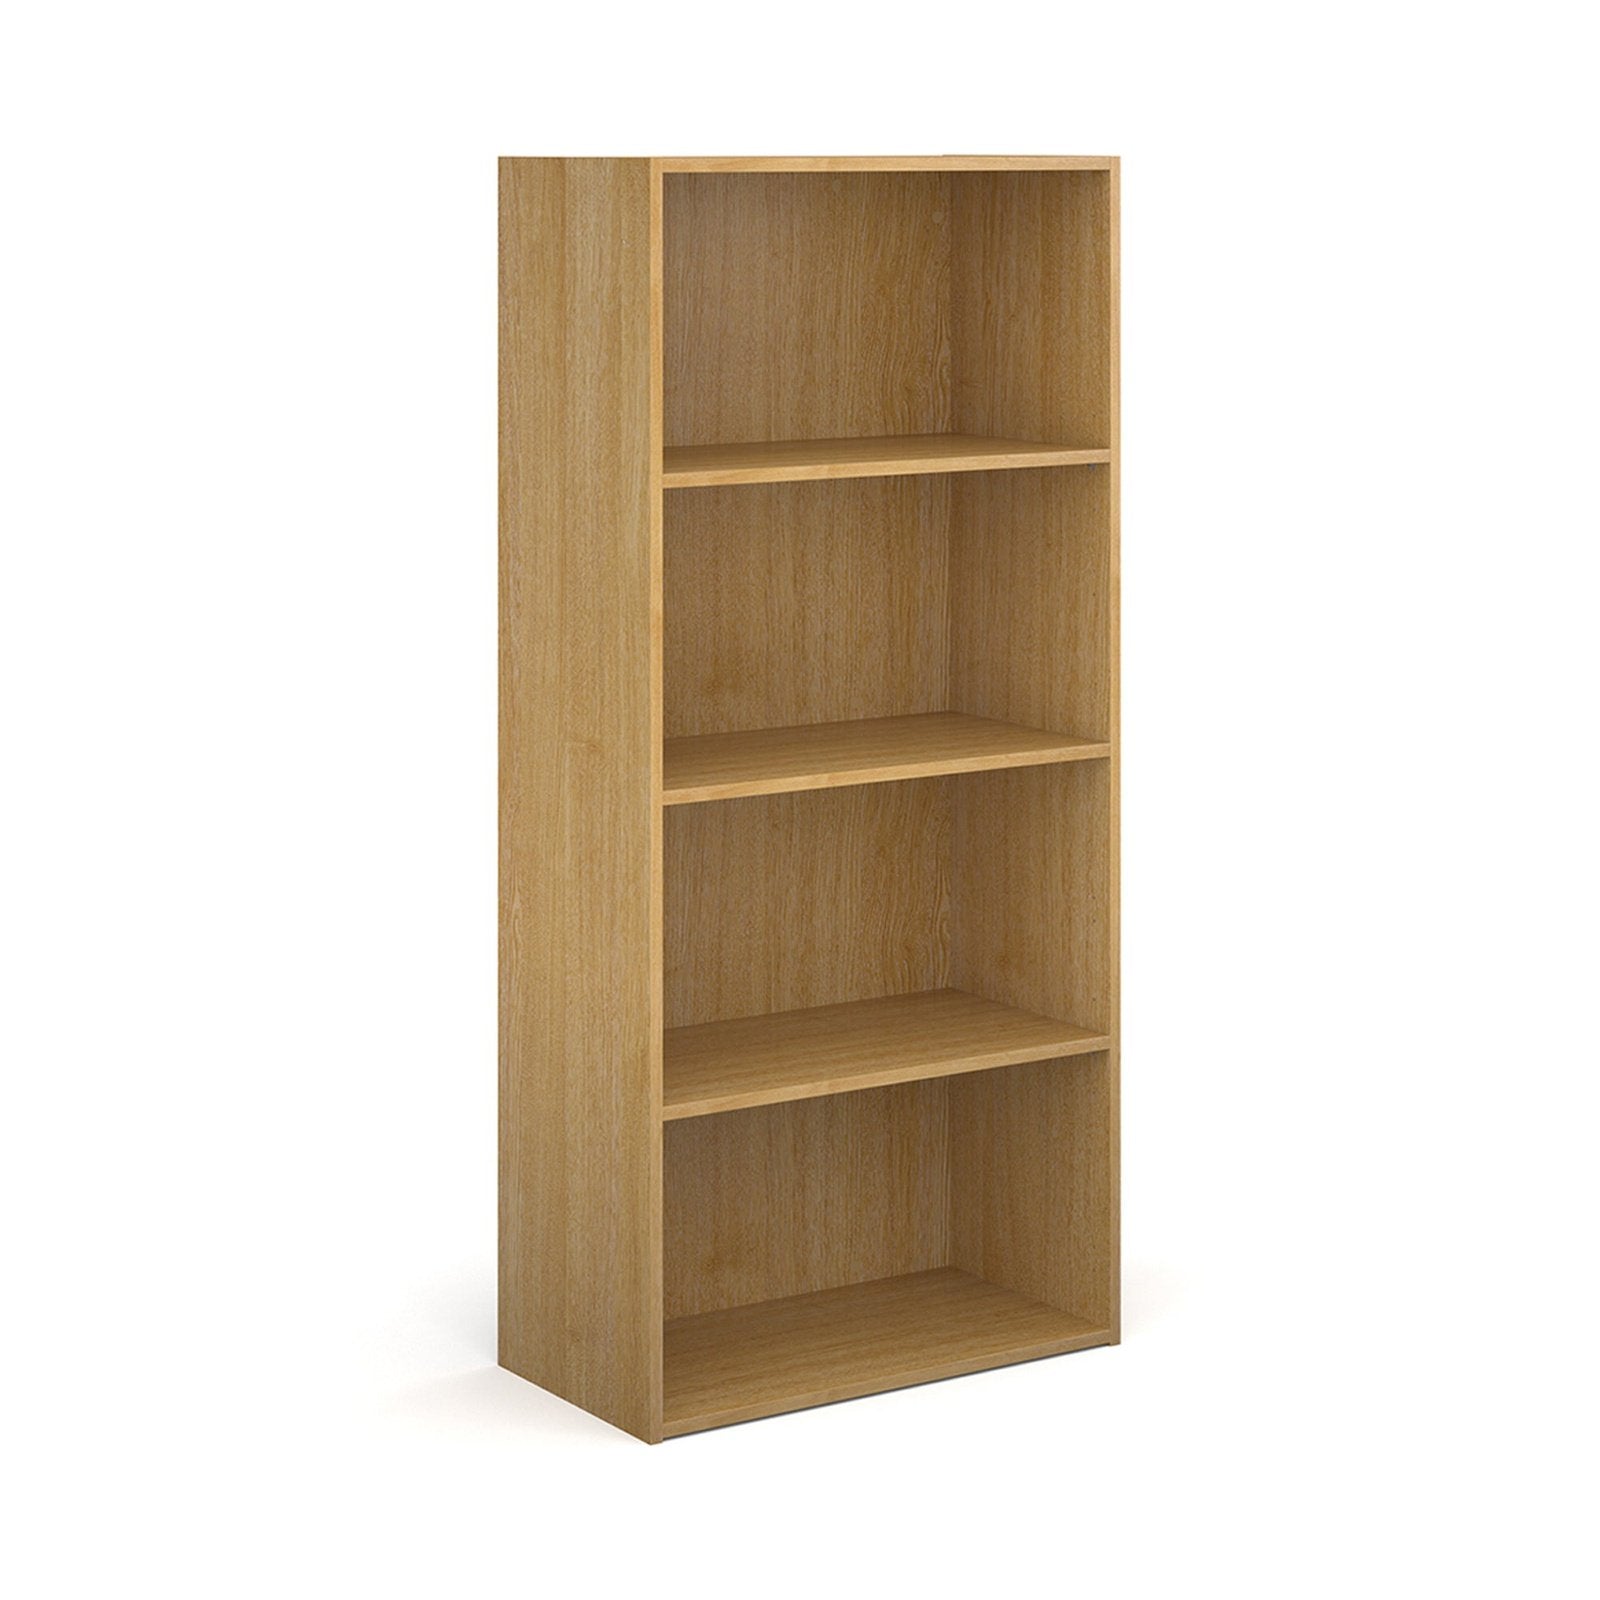 Contract bookcase - Office Products Online